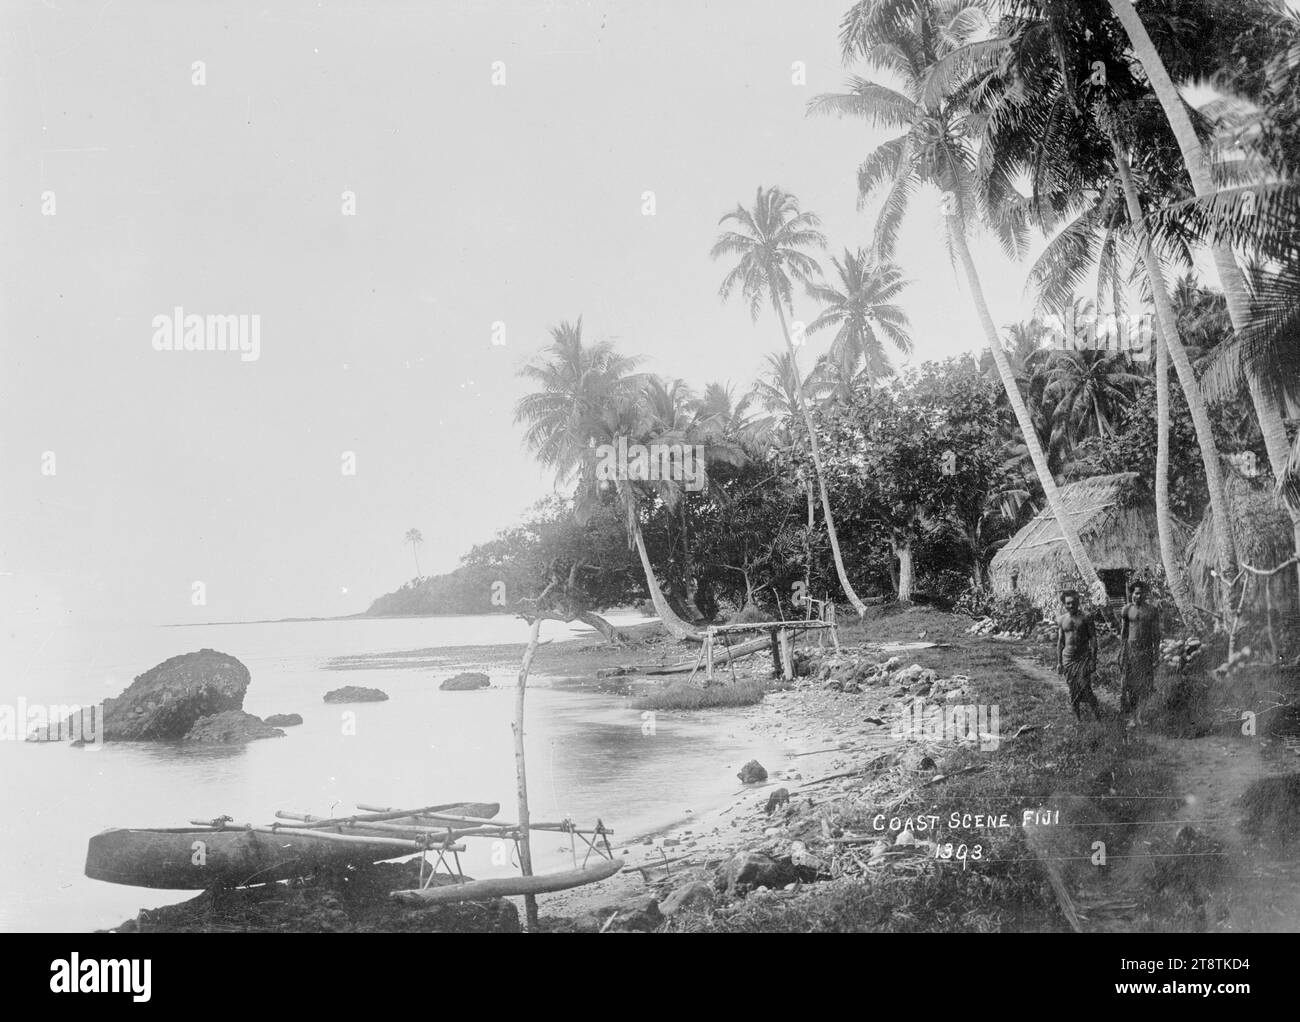 Coastal scene, Ovalau, Fiji, View of a beach fringed with palm trees. An out-rigger canoe is drawn up at the water's edge in the foreground. There is a hut near the foreshore and two Fijian men standing near by looking at the photographer. Taken in early 1900s Stock Photo